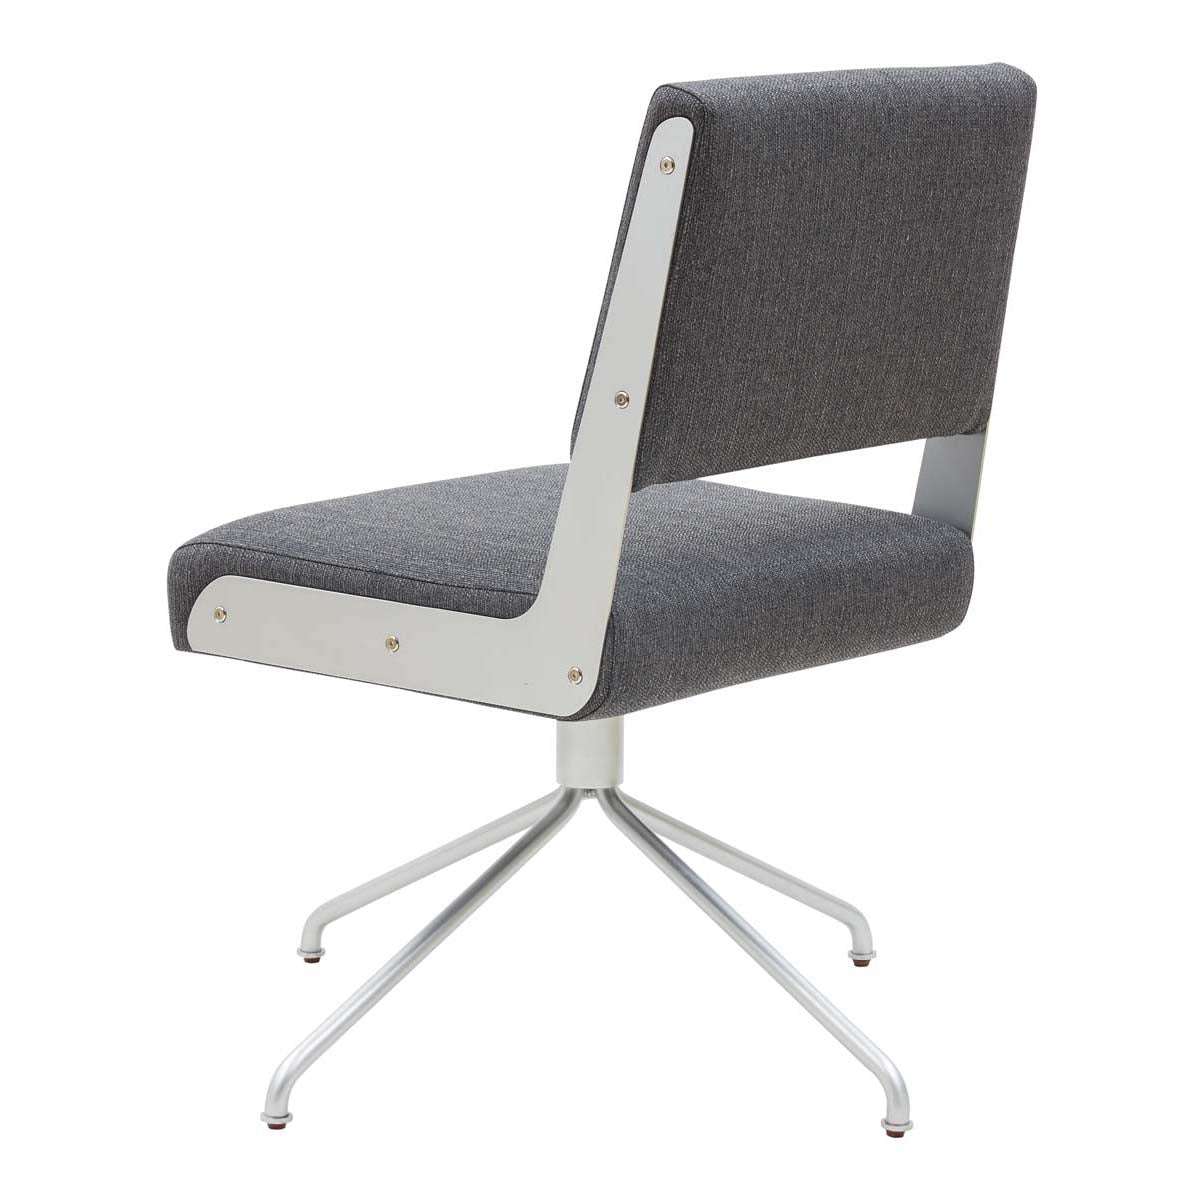 Safavieh Couture Emmeline Swivel Office Chair - Slate Grey / Silver